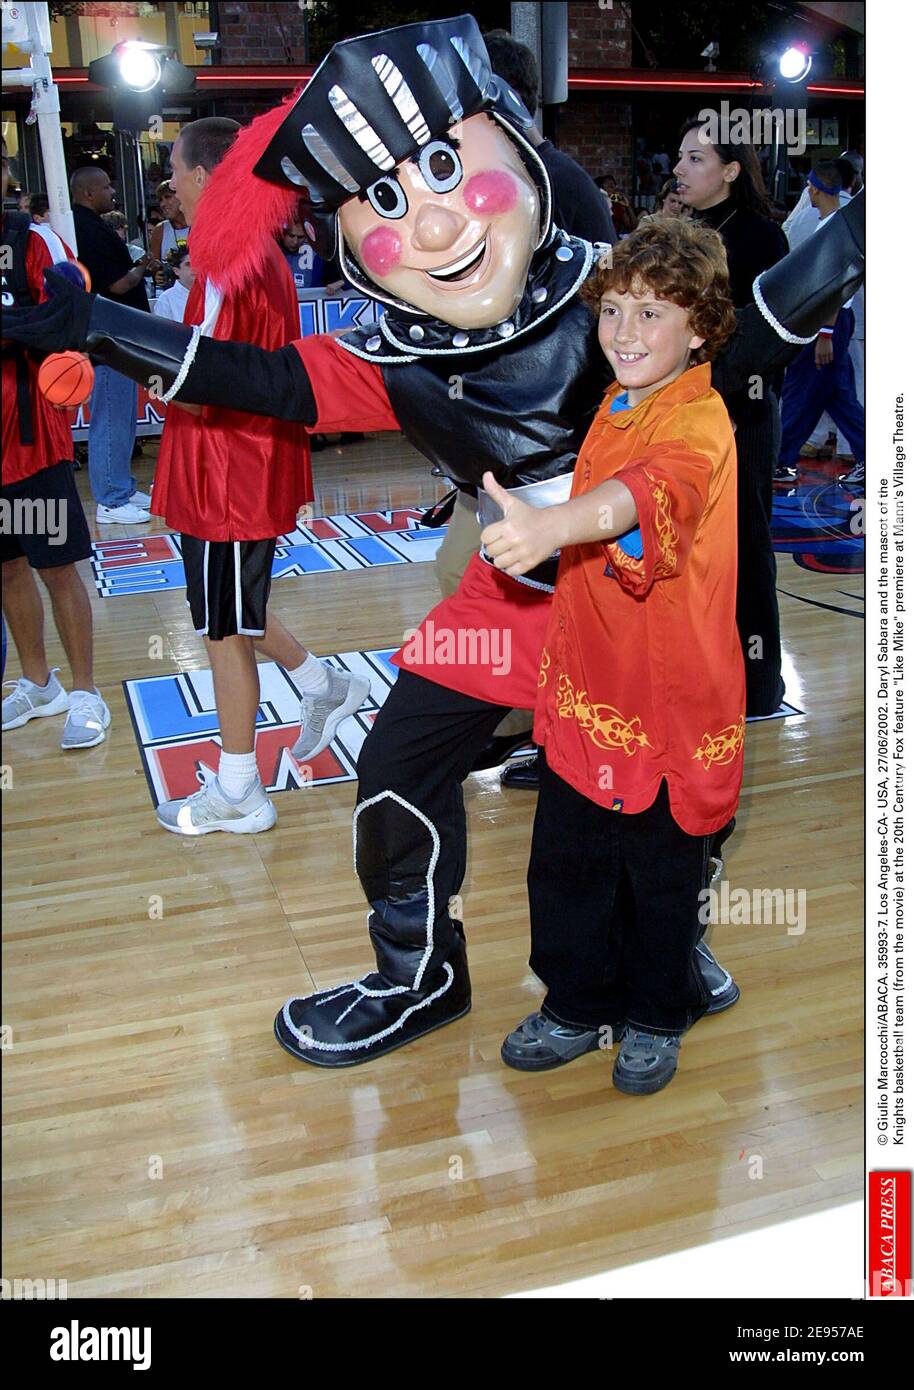 © Giulio Marcocchi/ABACA. 35993-7. Los Angeles-CA- USA, 27/06/2002. Daryl Sabara and the mascot of the Knights basketball team (from the movie) at the 20th Century Fox feature Like Mike premiere at Mann's Village Theatre. Stock Photo